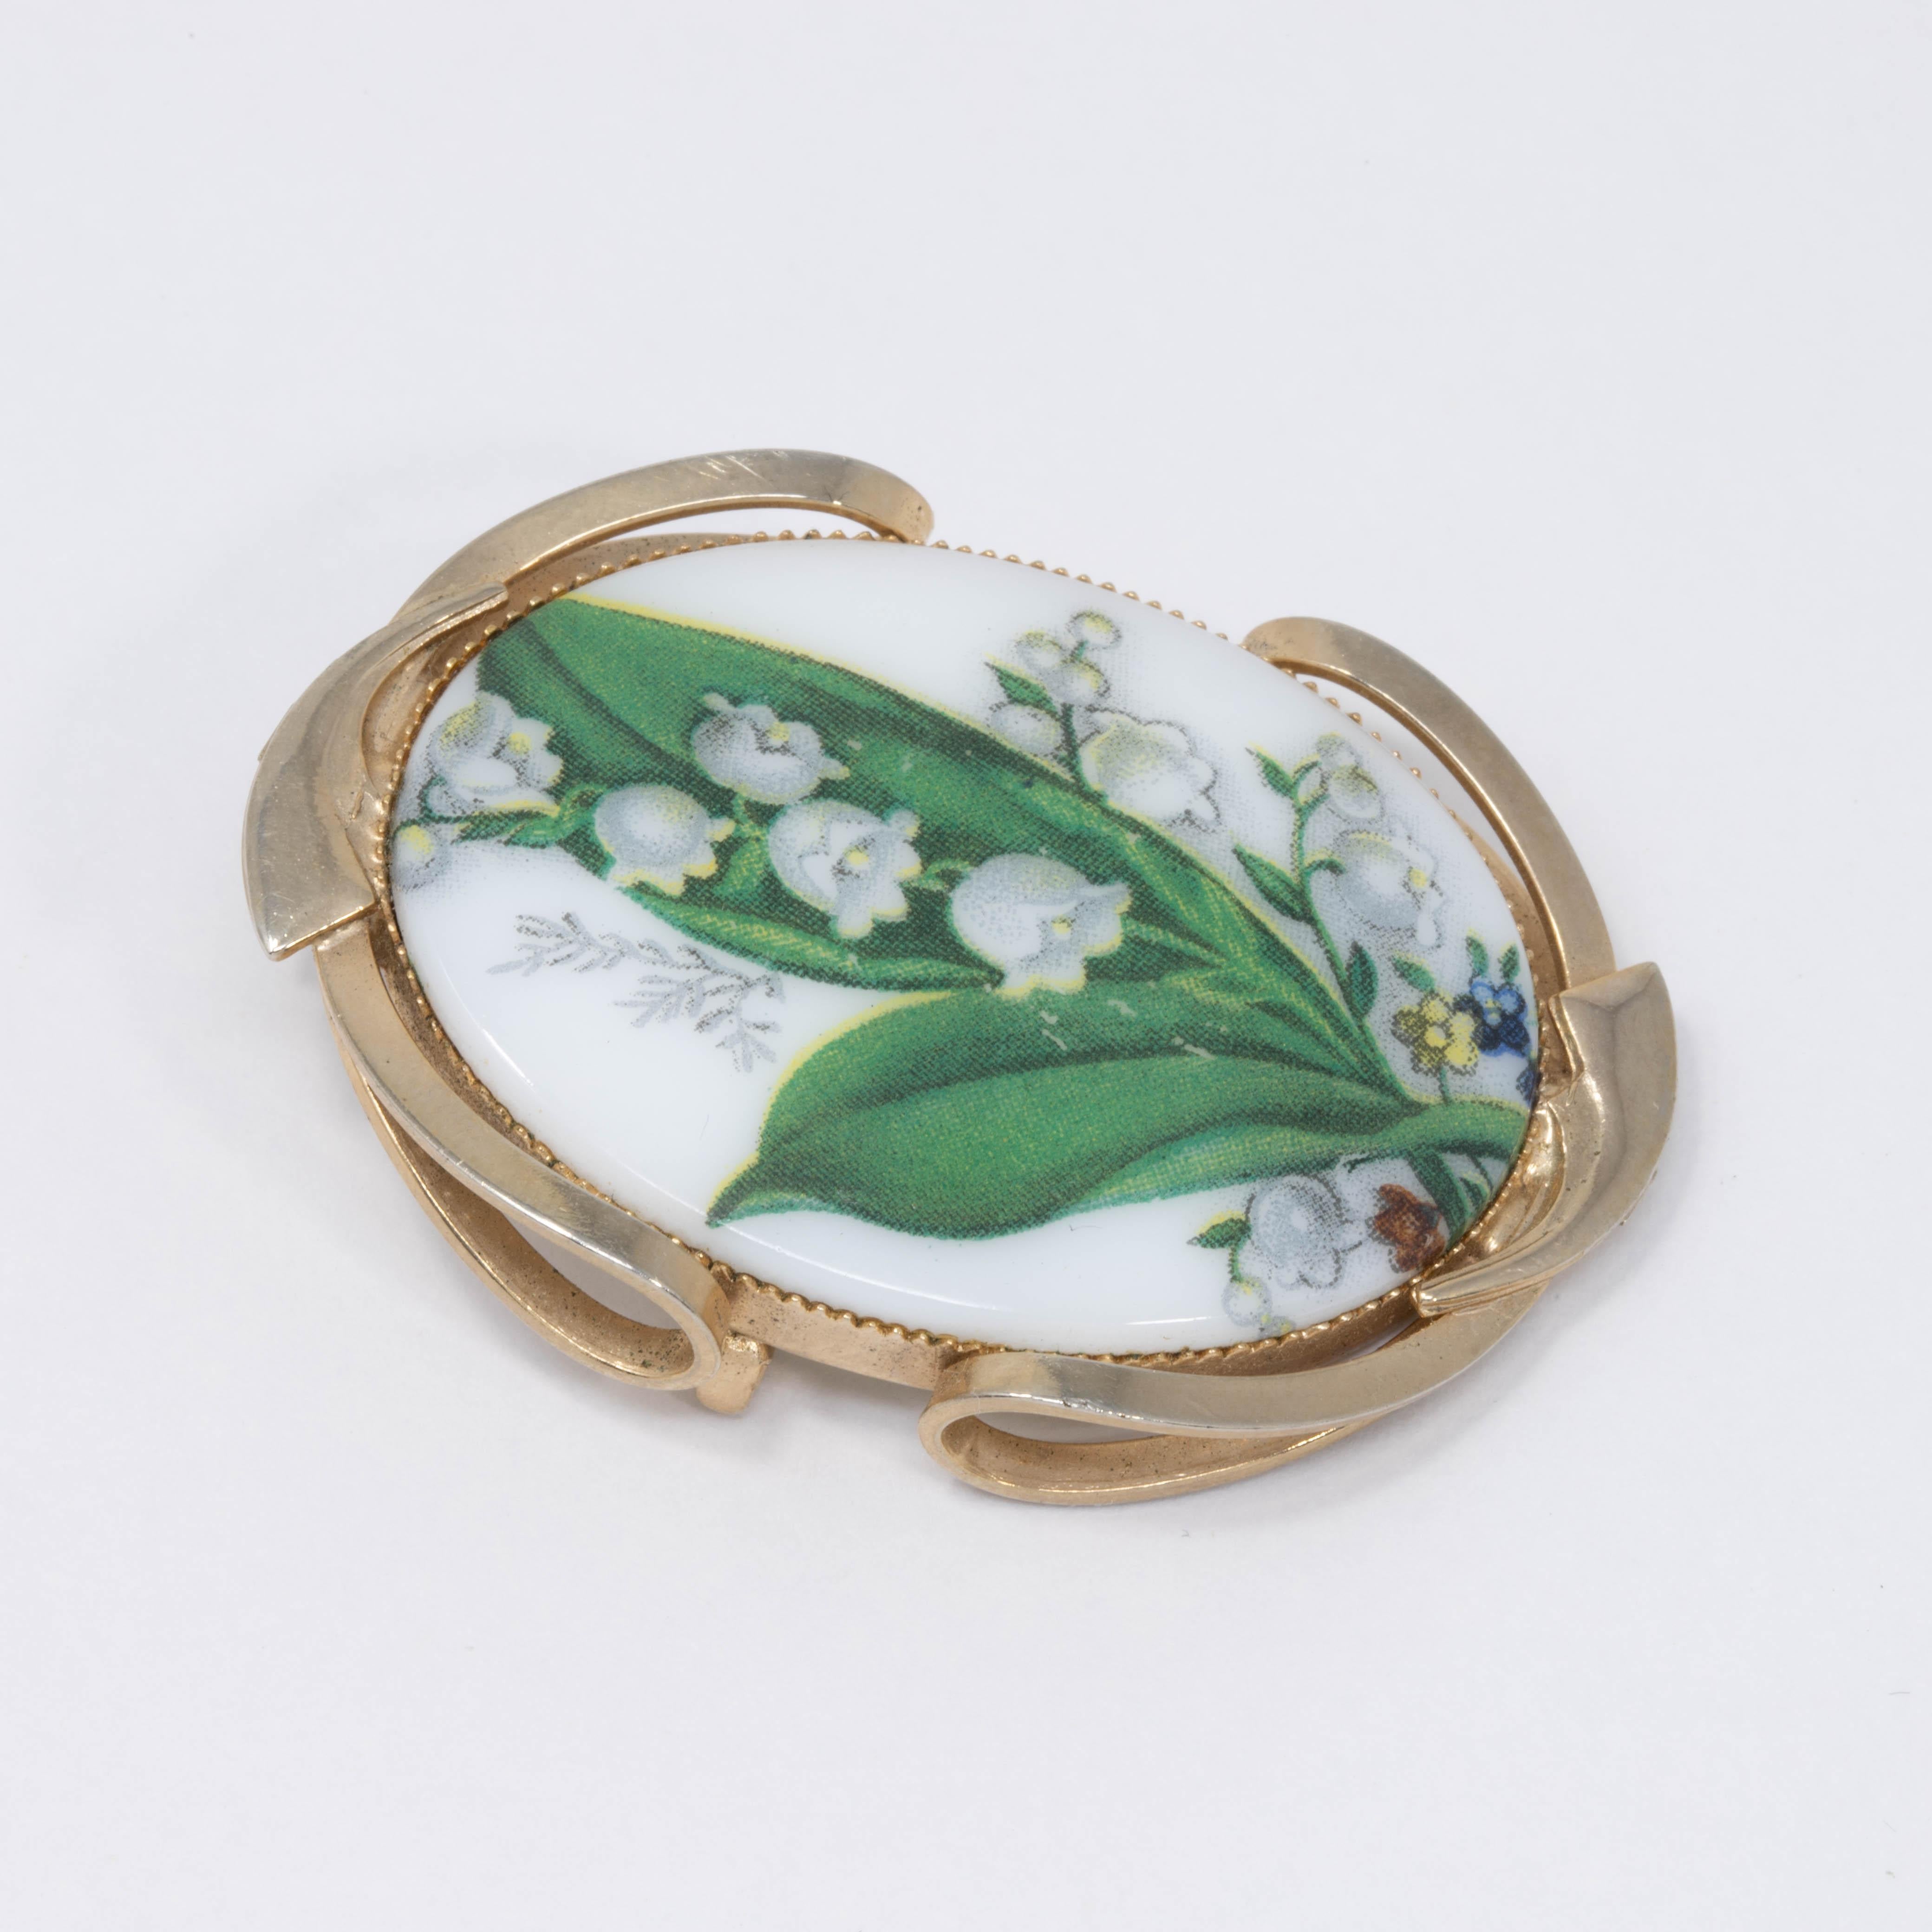 A lovely pin brooch and pendant! Features an oval white stone centerpiece with a painted lily of the valley, set in a decorative goldtone metal setting.